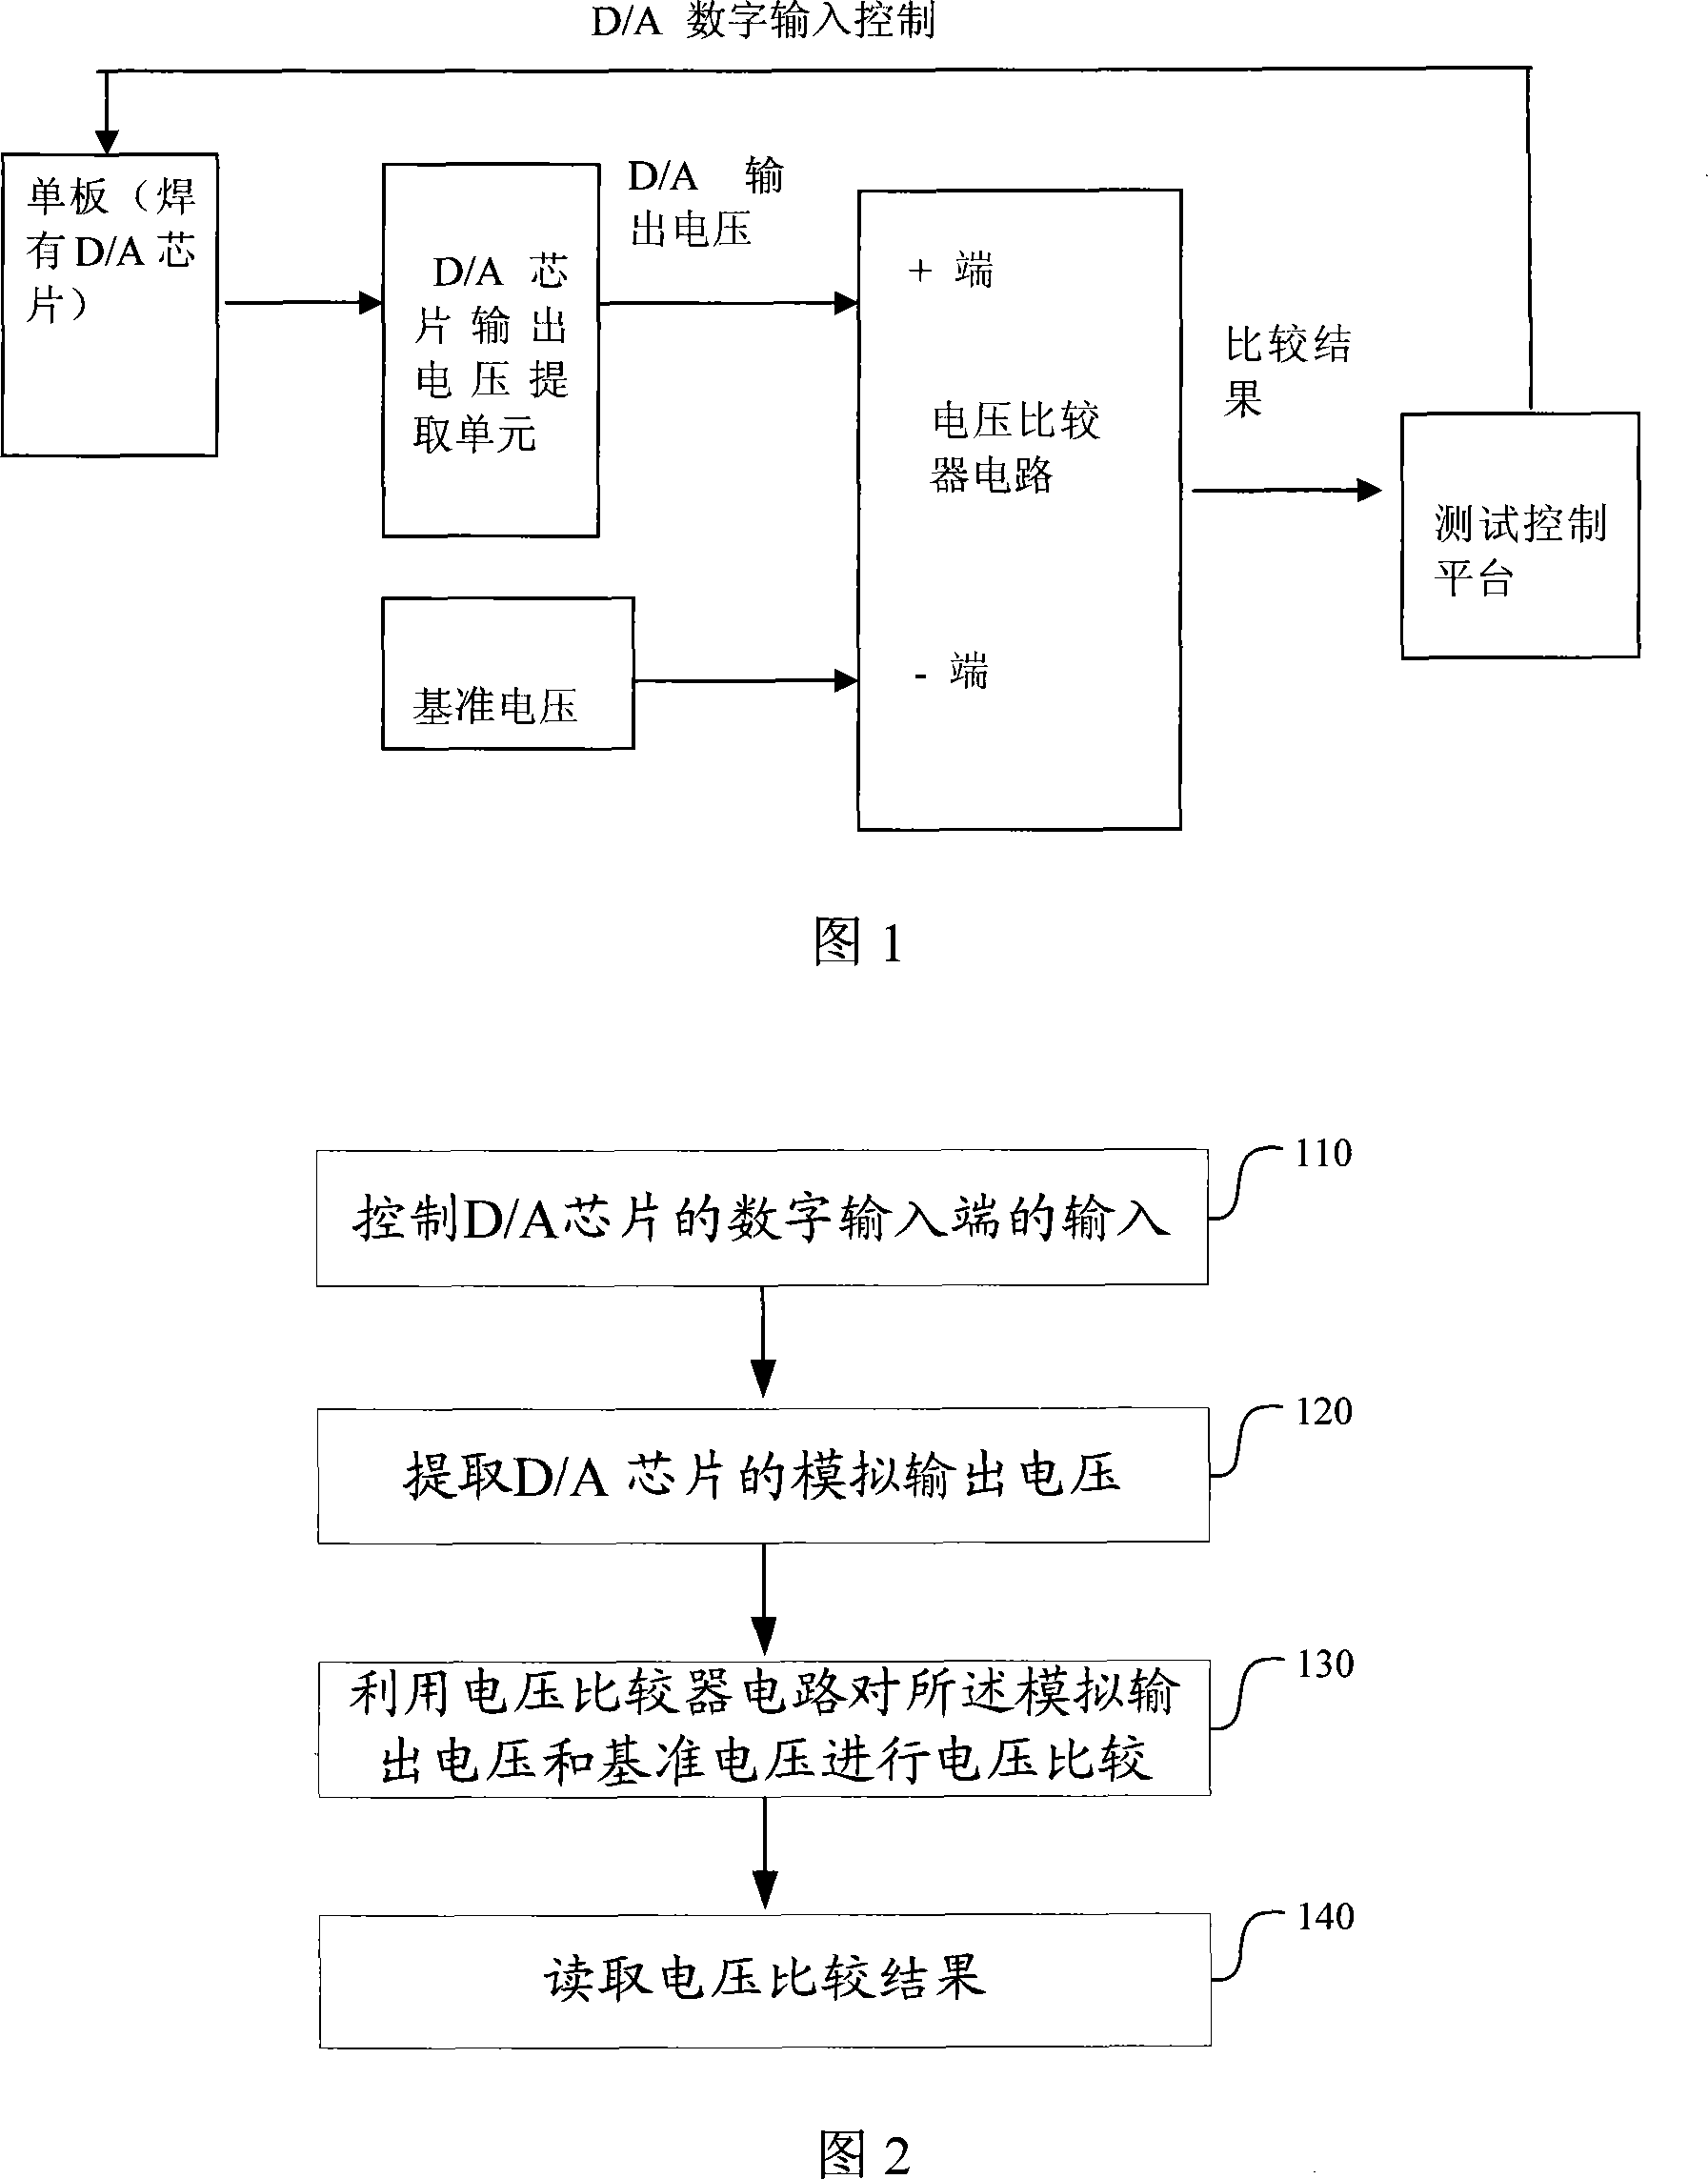 A method and device for testing D/A conversion function of D/A conversion chip